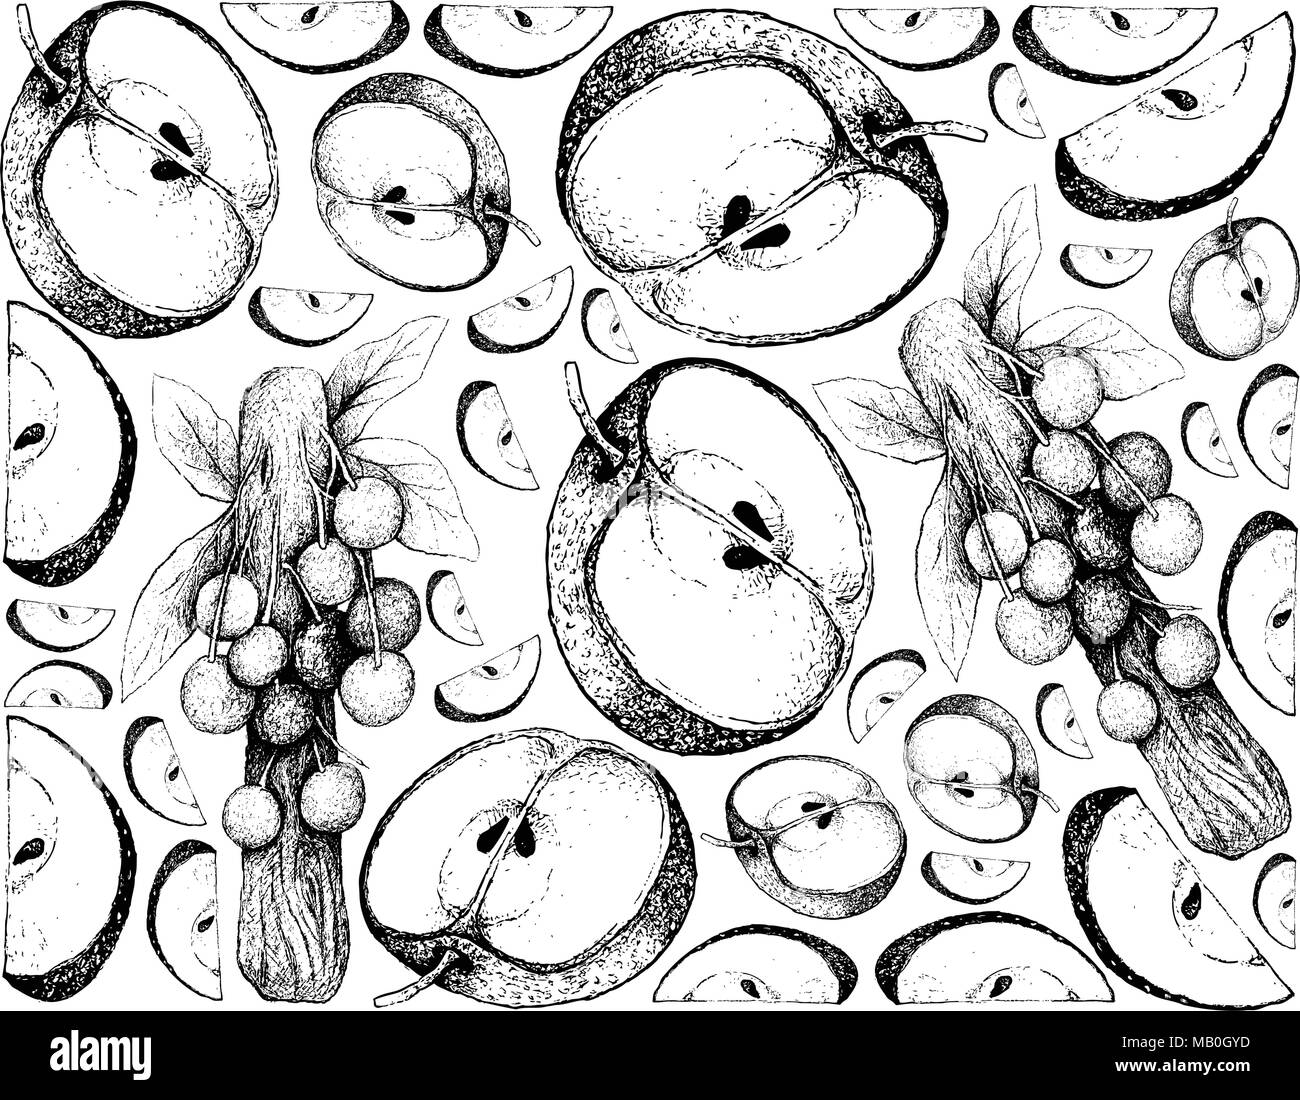 Exotic Fruits, Illustration Wallpaper Background of Hand Drawn Sketch of Nashi Pears, Chinese Pears or Pyrus Pyrifolia Fruits. Stock Vector